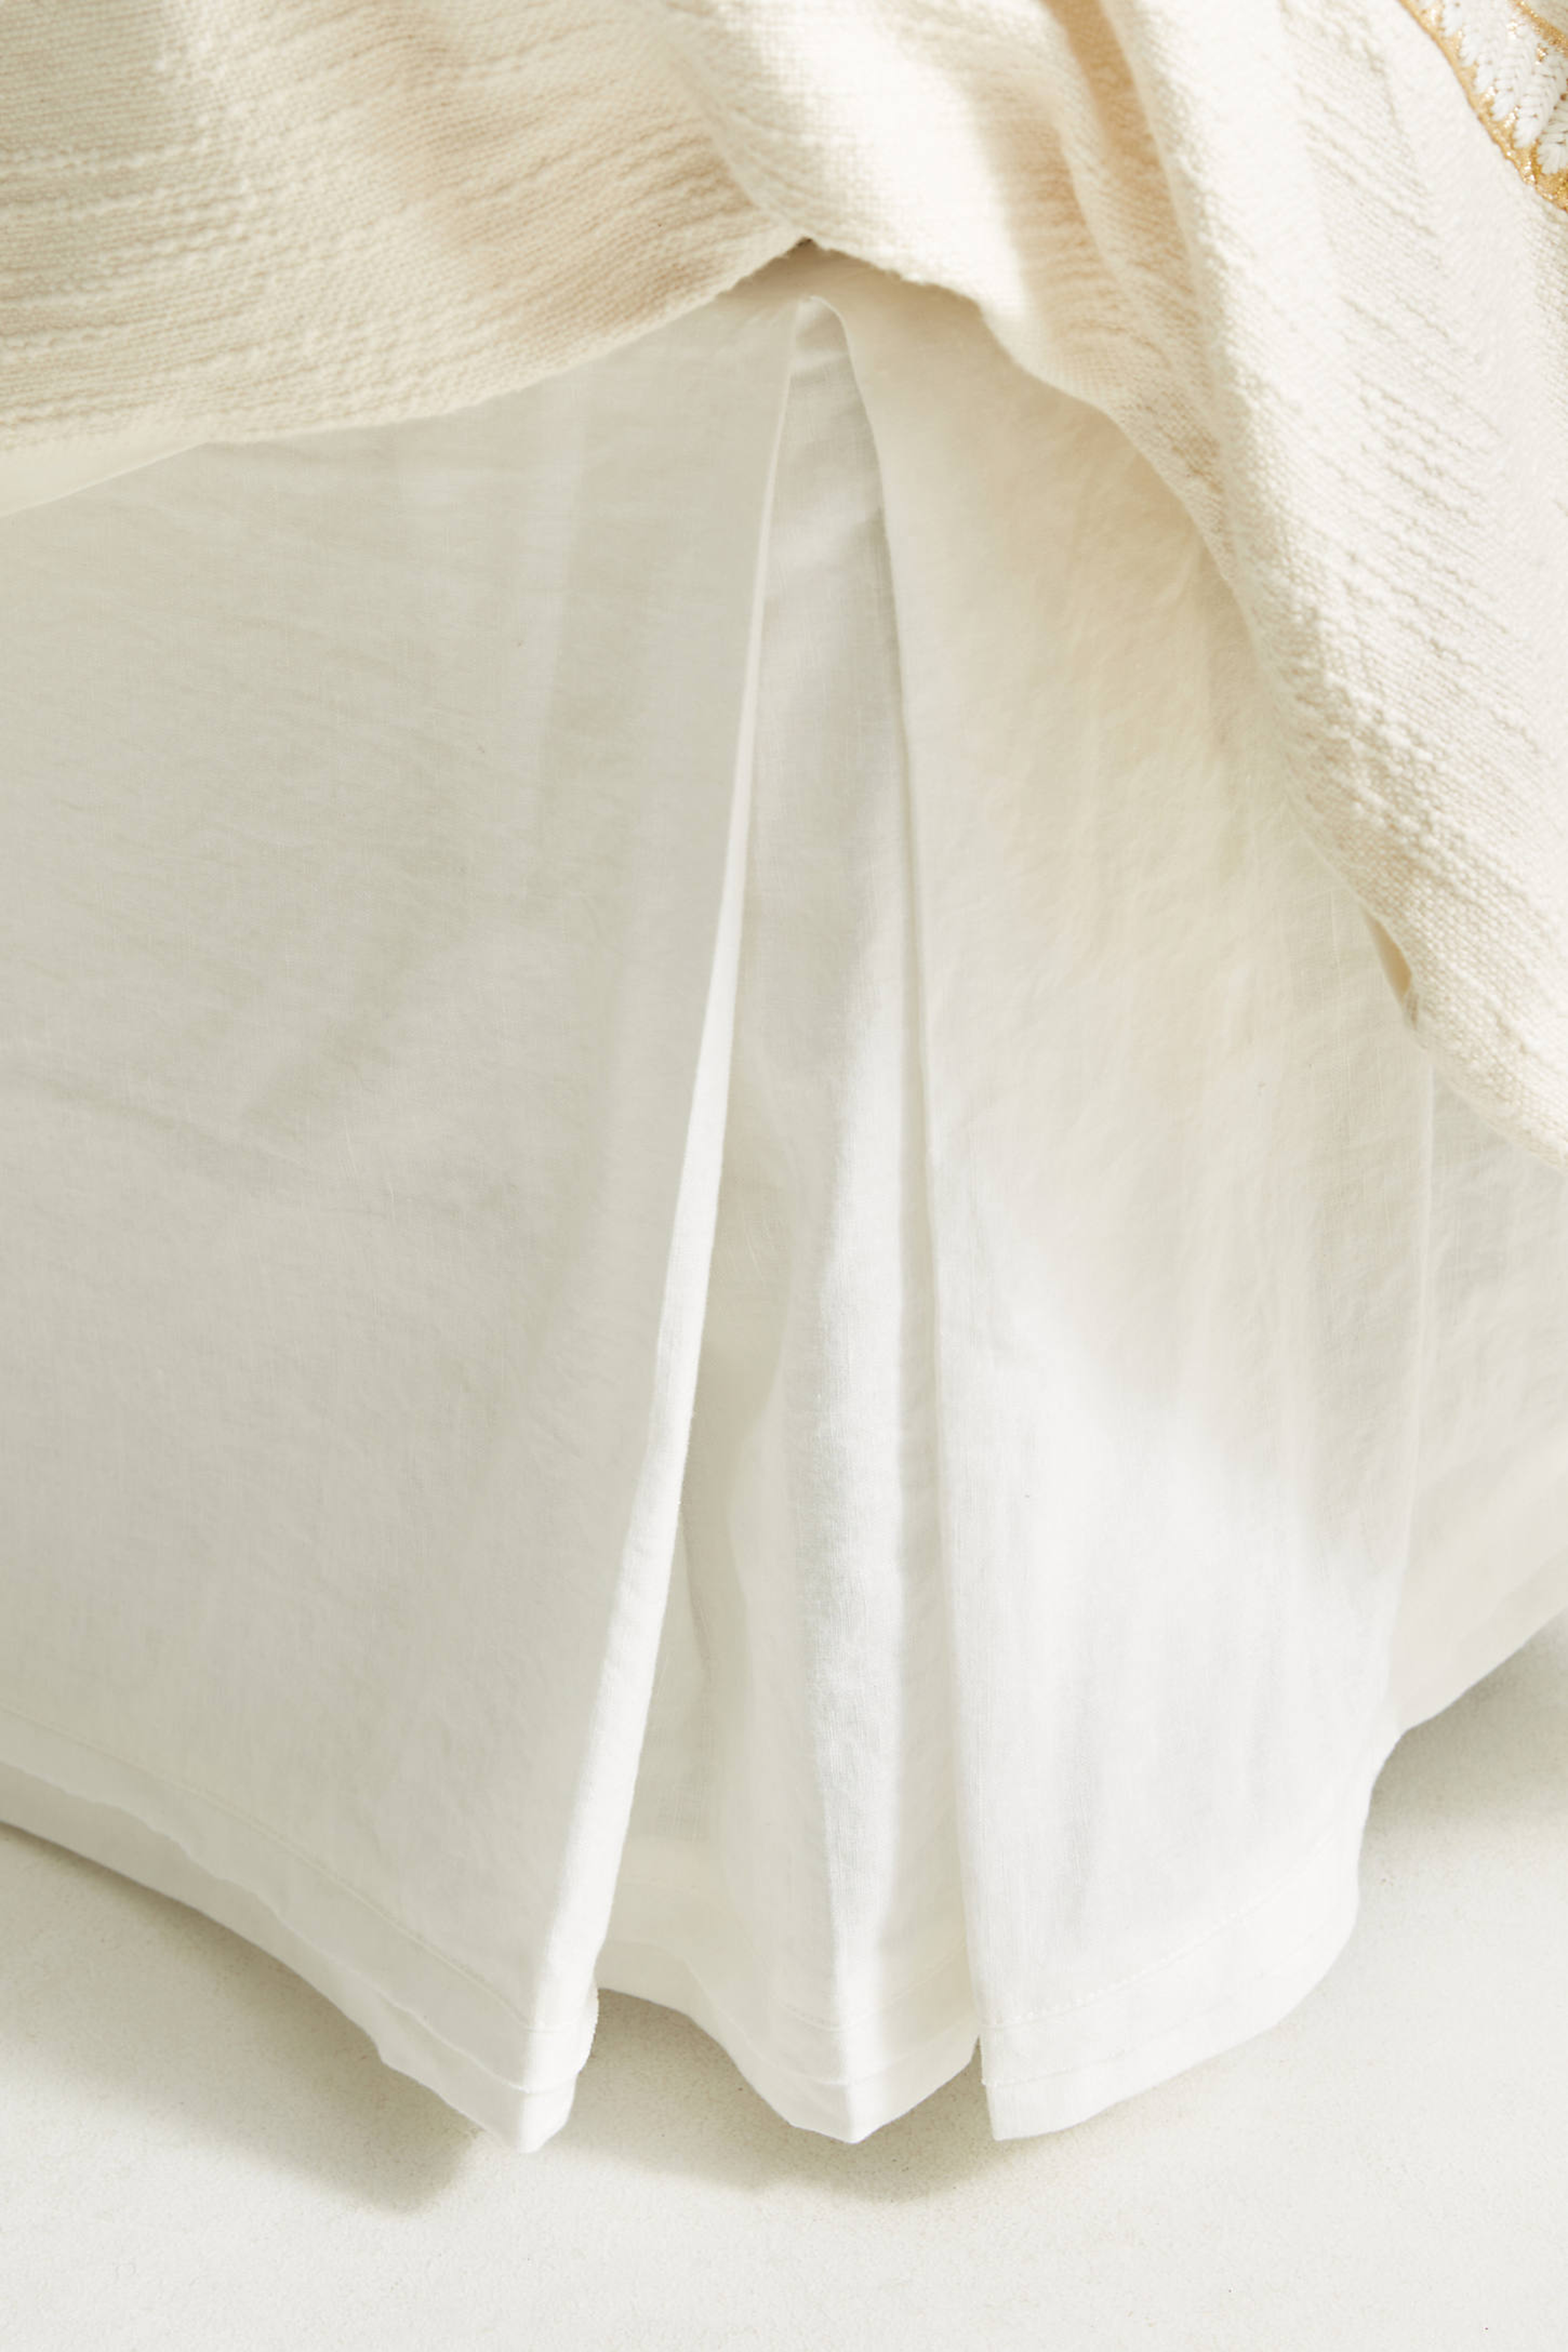 Relaxed Cotton-Linen Bed Skirt - Anthropologie